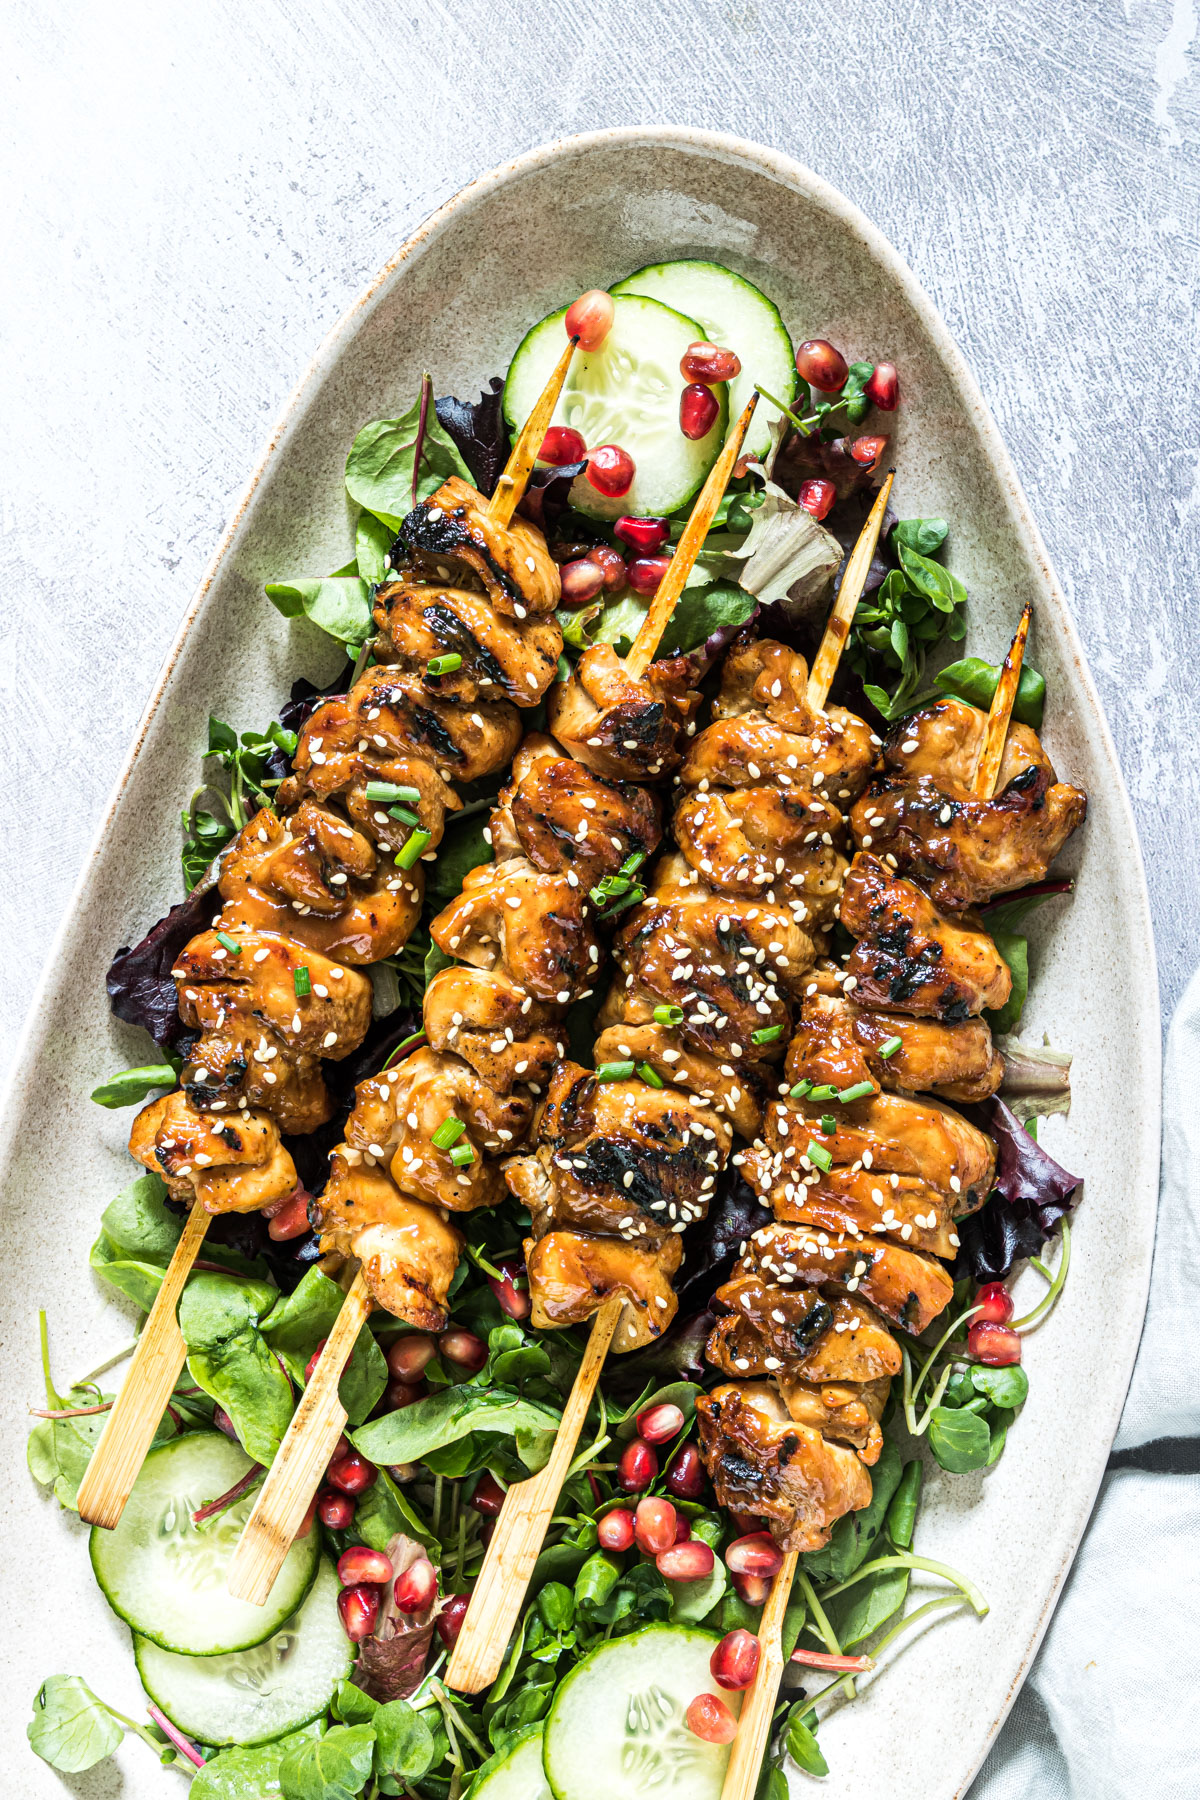 grilled chicken skewers on a bed of lettuce and ready to be served